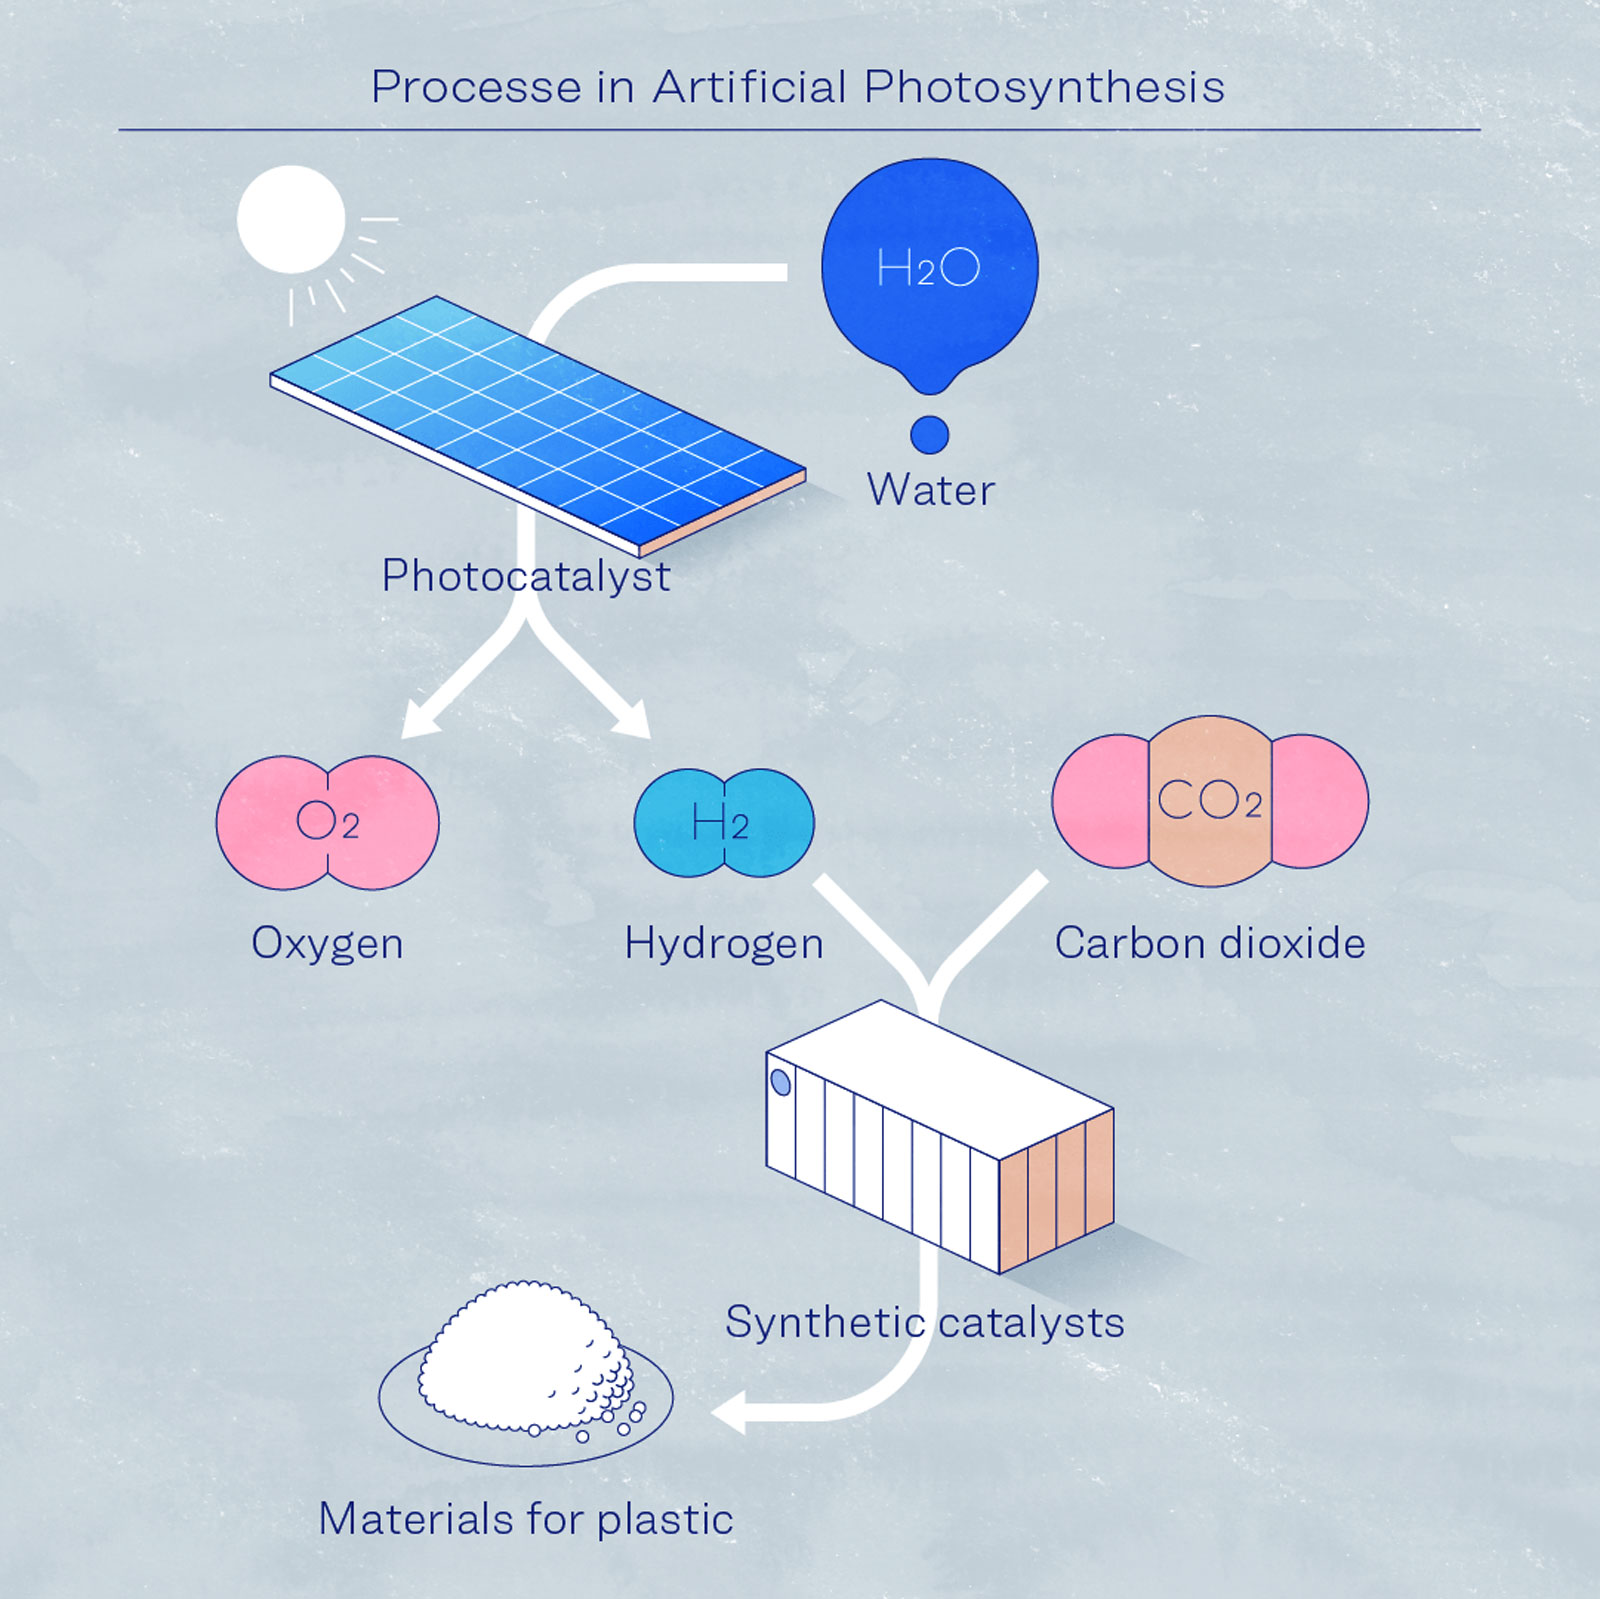 Three processes in Artificial Photosynthesis